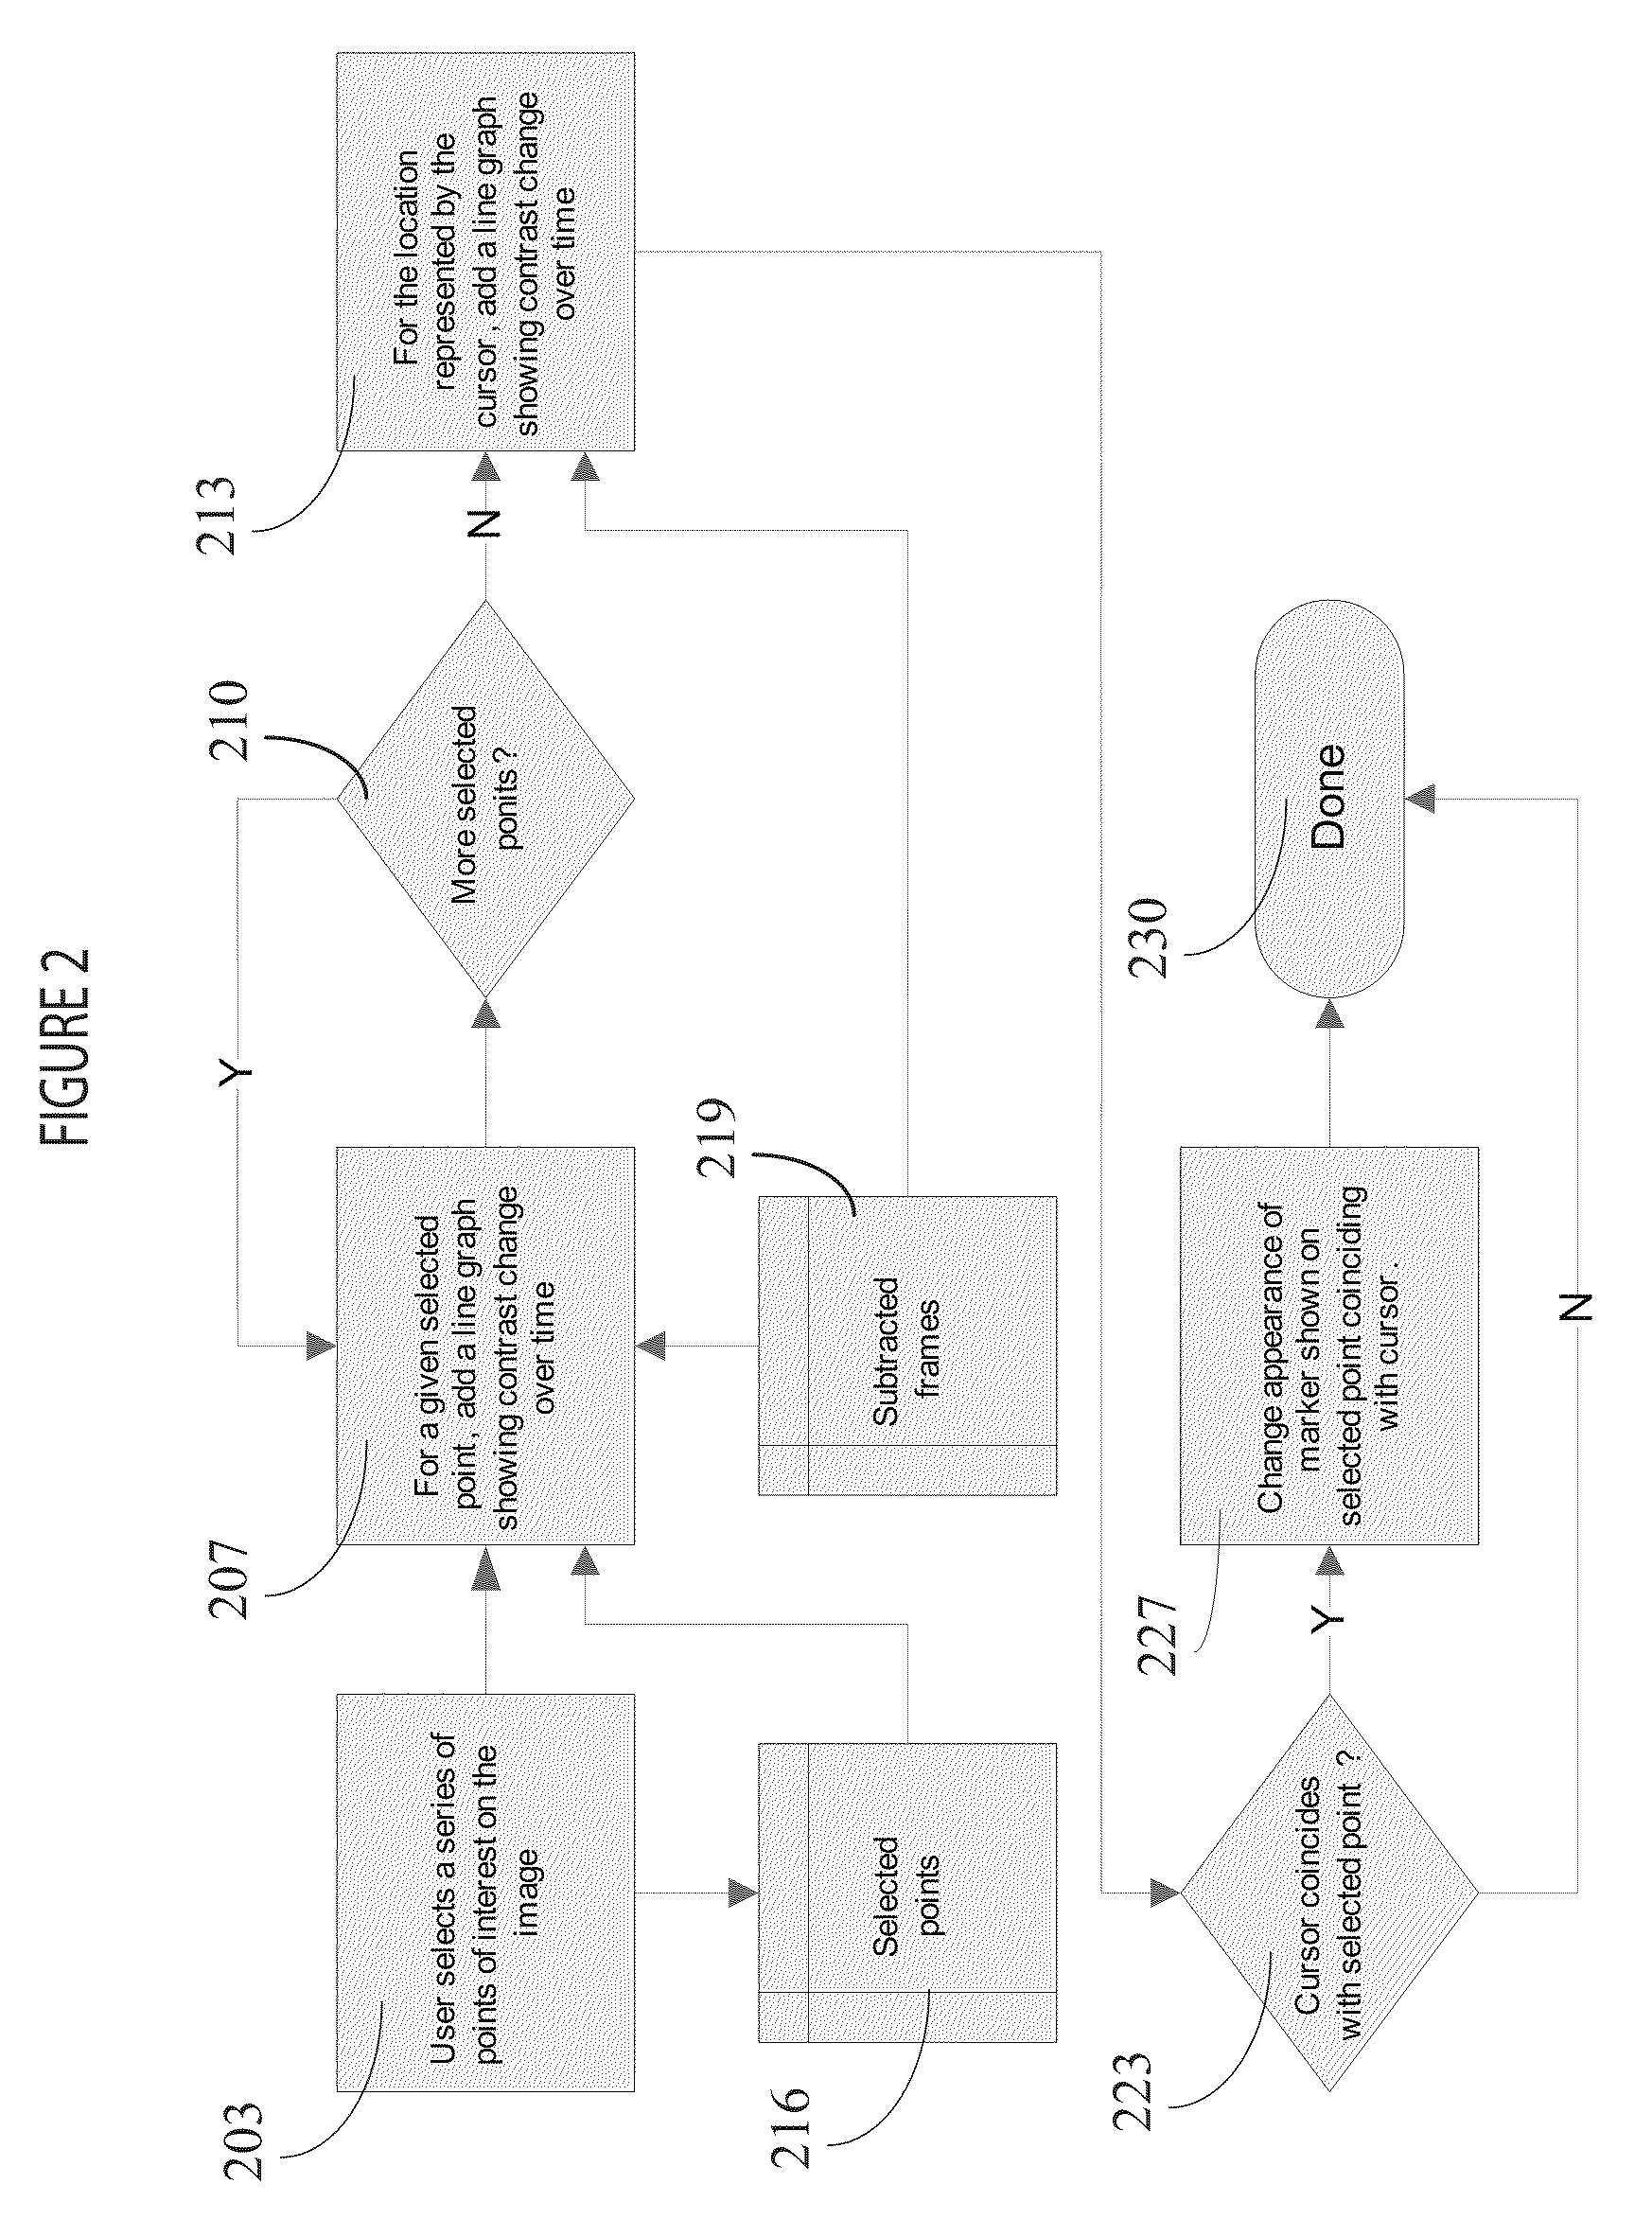 Method of visualization of contrast intensity change over time in a DSA image